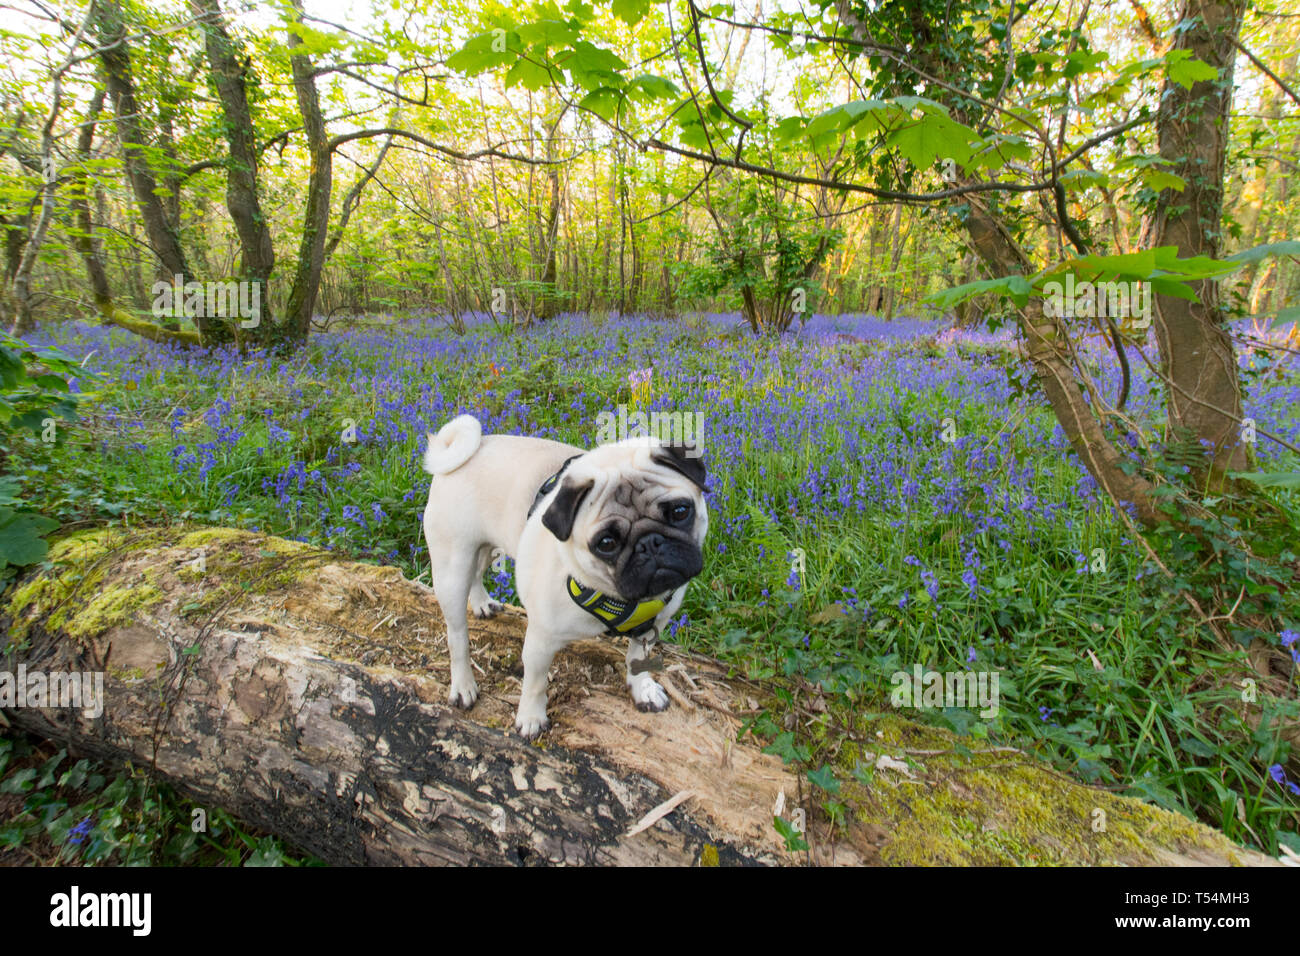 Pug dog standing on fallen tree in bluebell wood Stock Photo